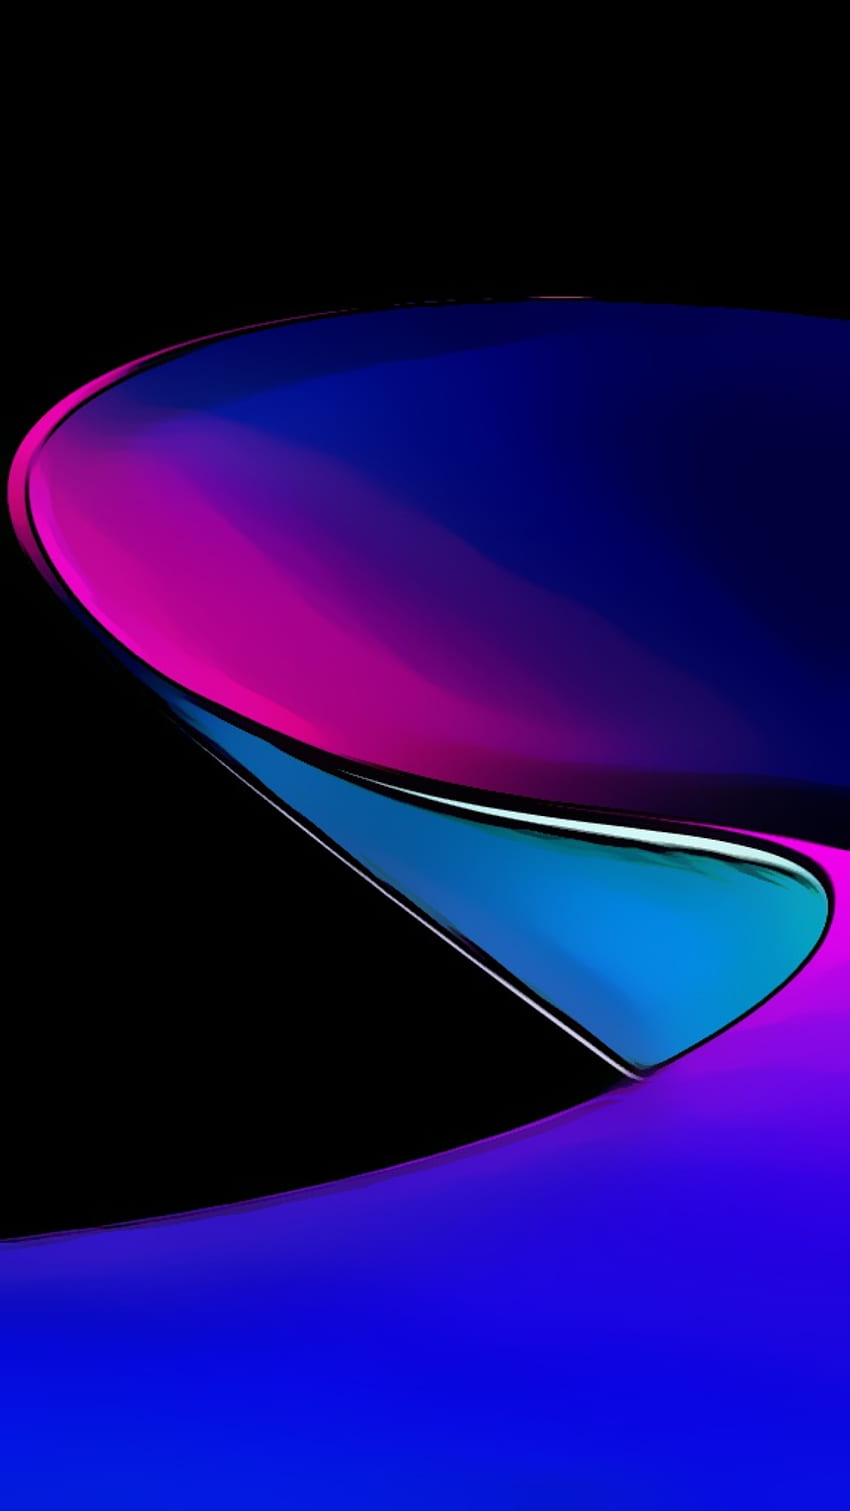 slide, magenta, pink, android, oled, pattern, 3d, amoled, modern, design, graphic, digital, waves, electric blue, new, neon, texture, black, abstract, iphone, curves, blue, material, corporate, , viola Sfondo del telefono HD